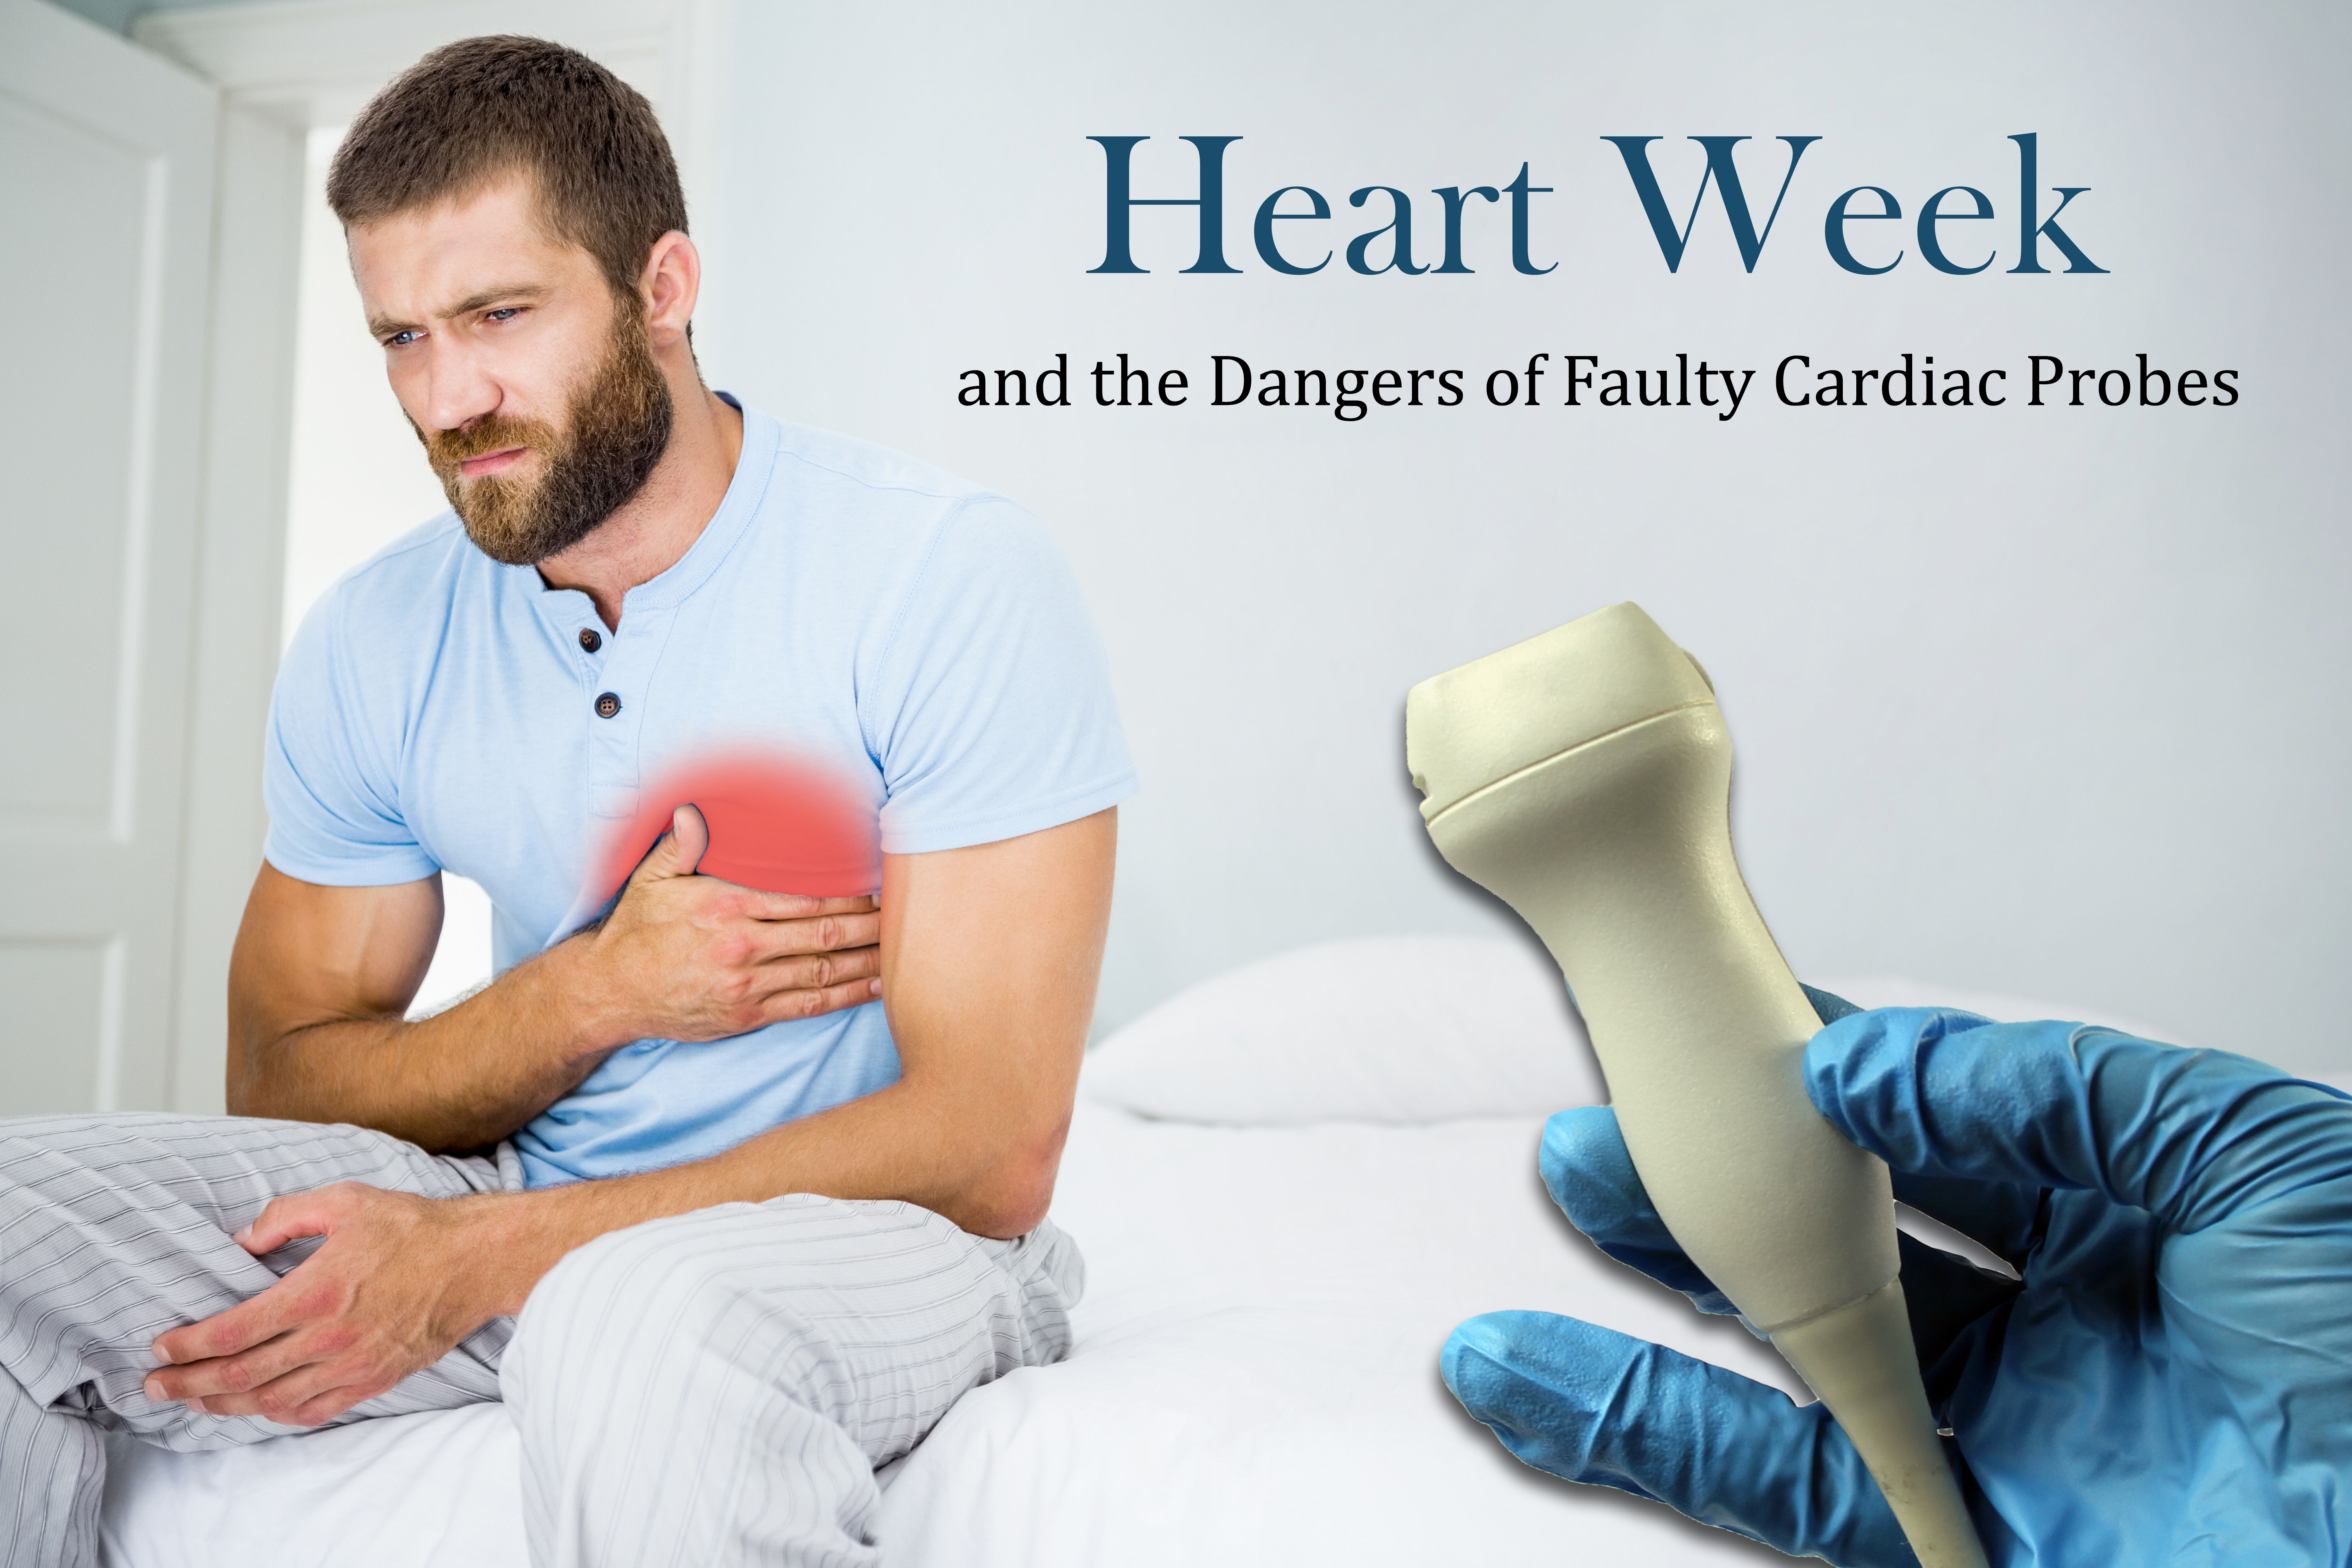 Heart Week and the Dangers of Faulty Cardiac Probes